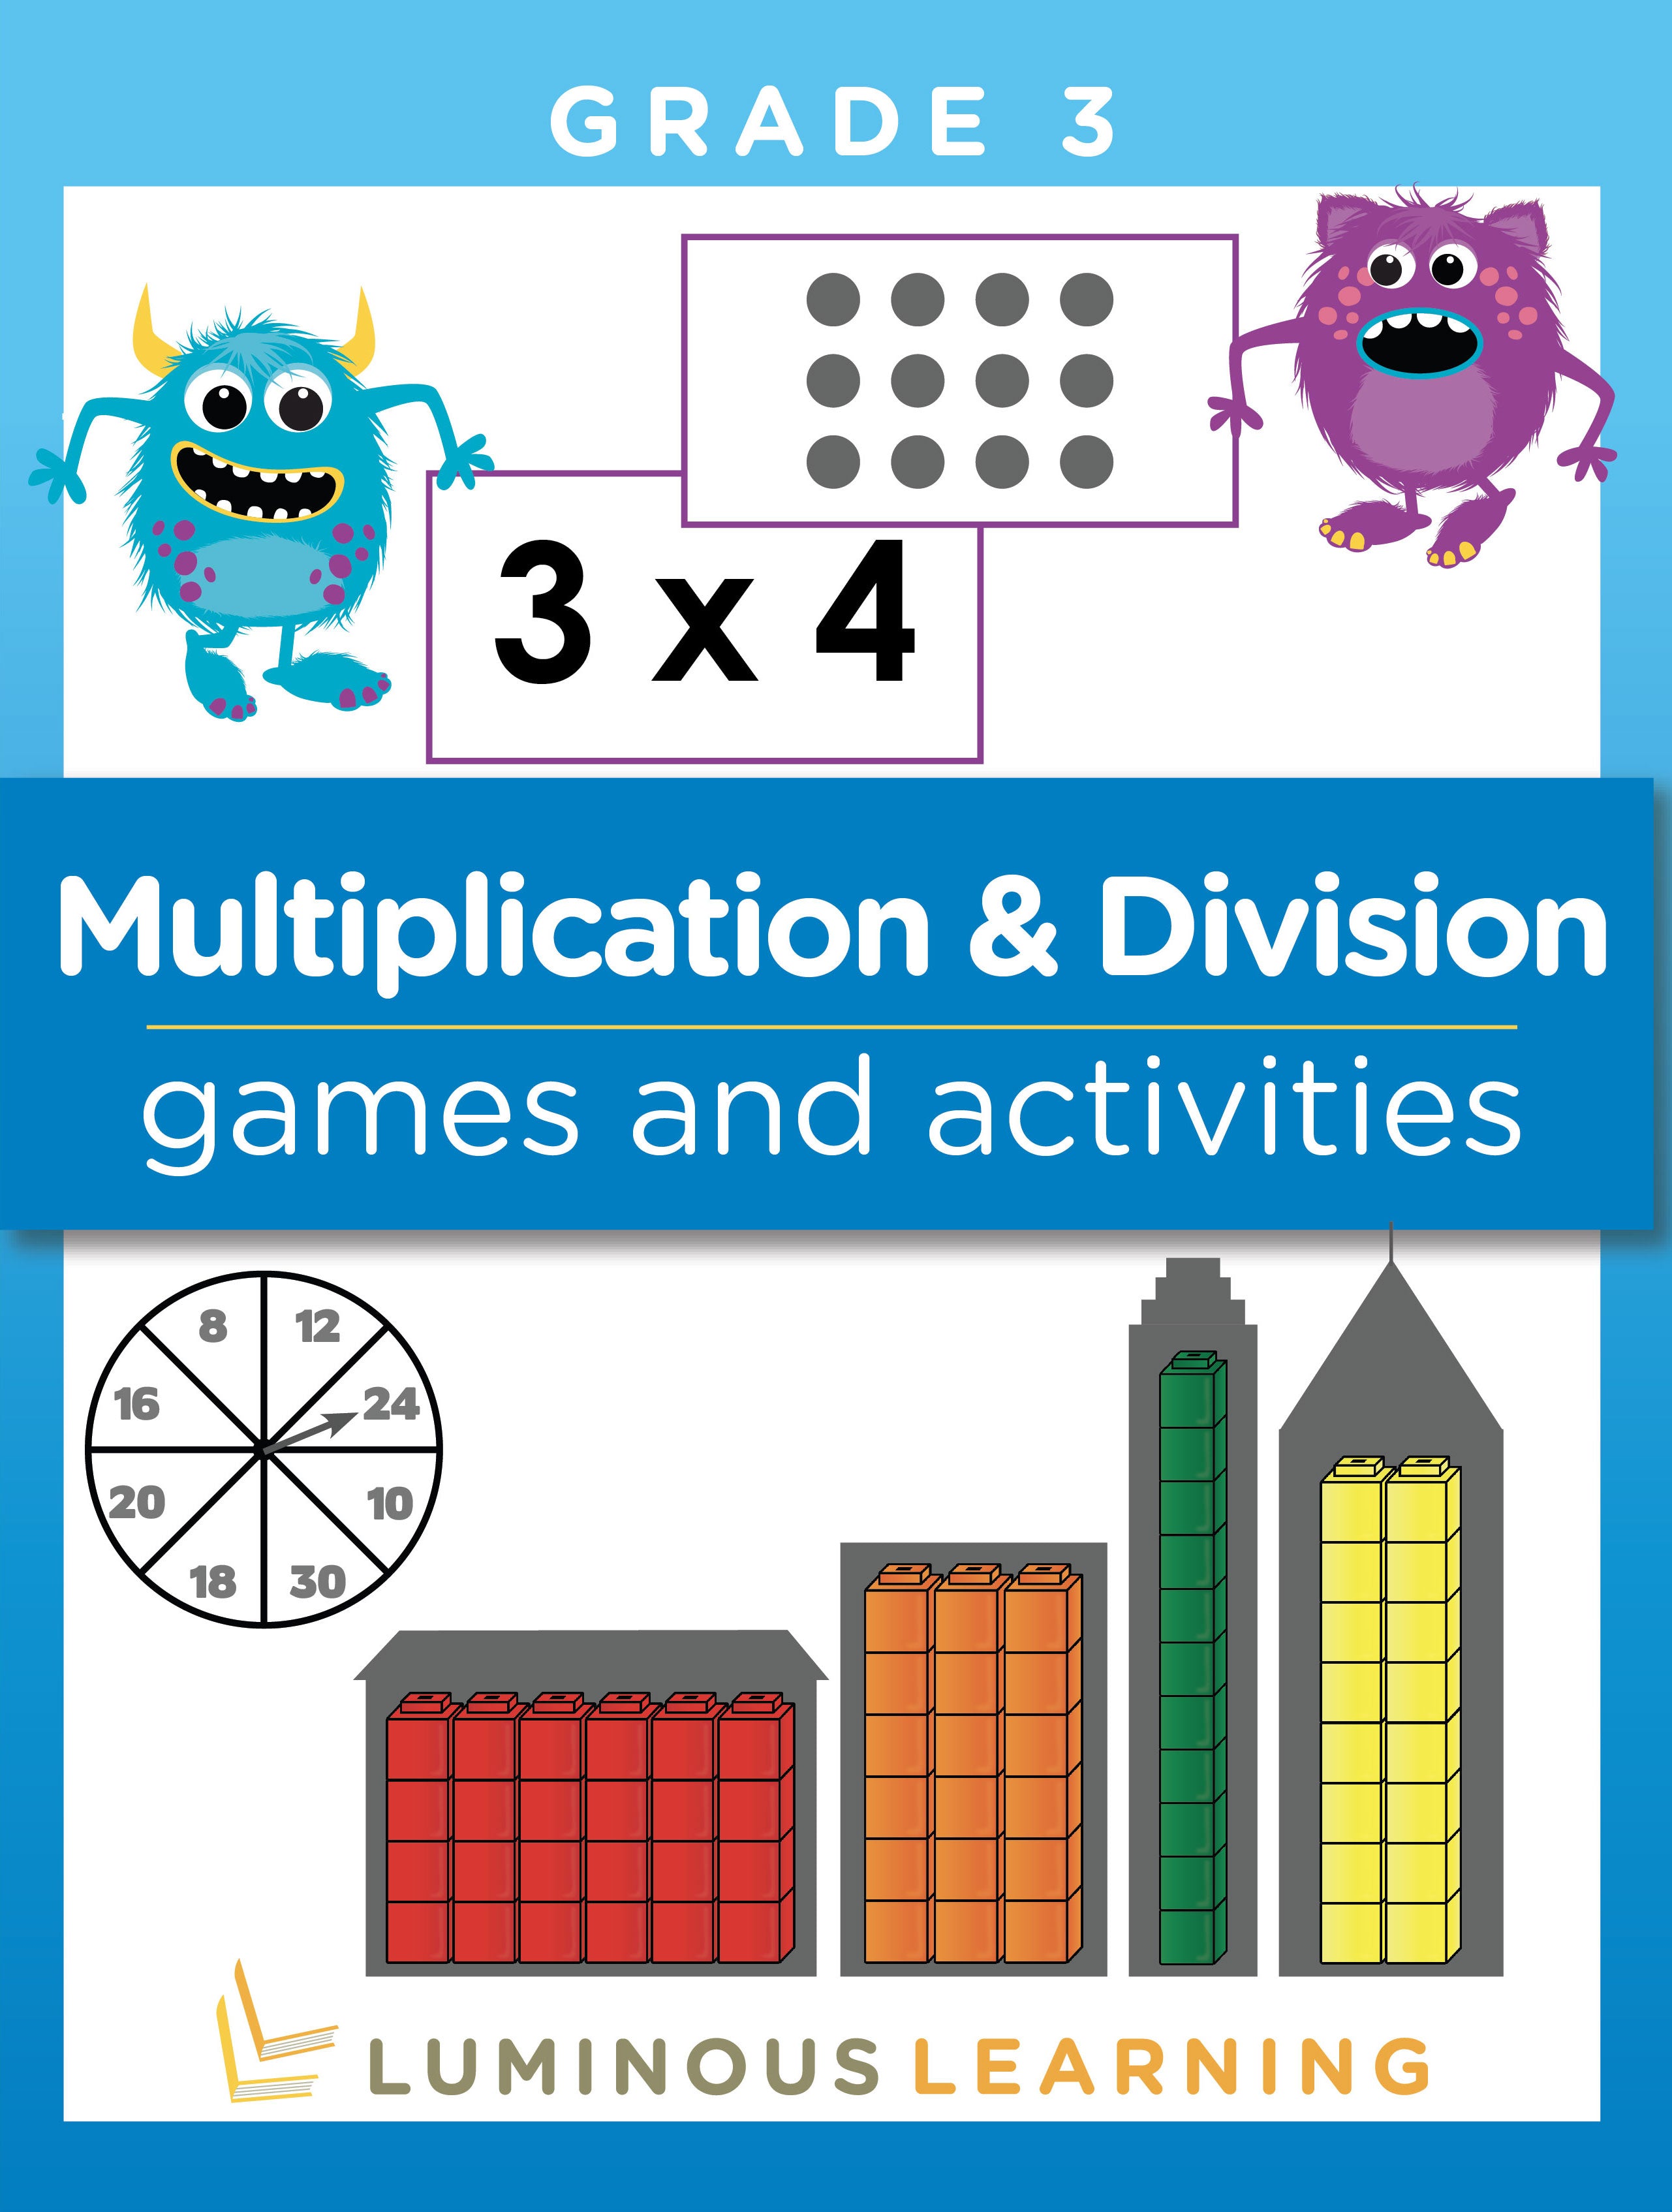 multiplication-and-division-games-and-activities-grade-3-math-activ